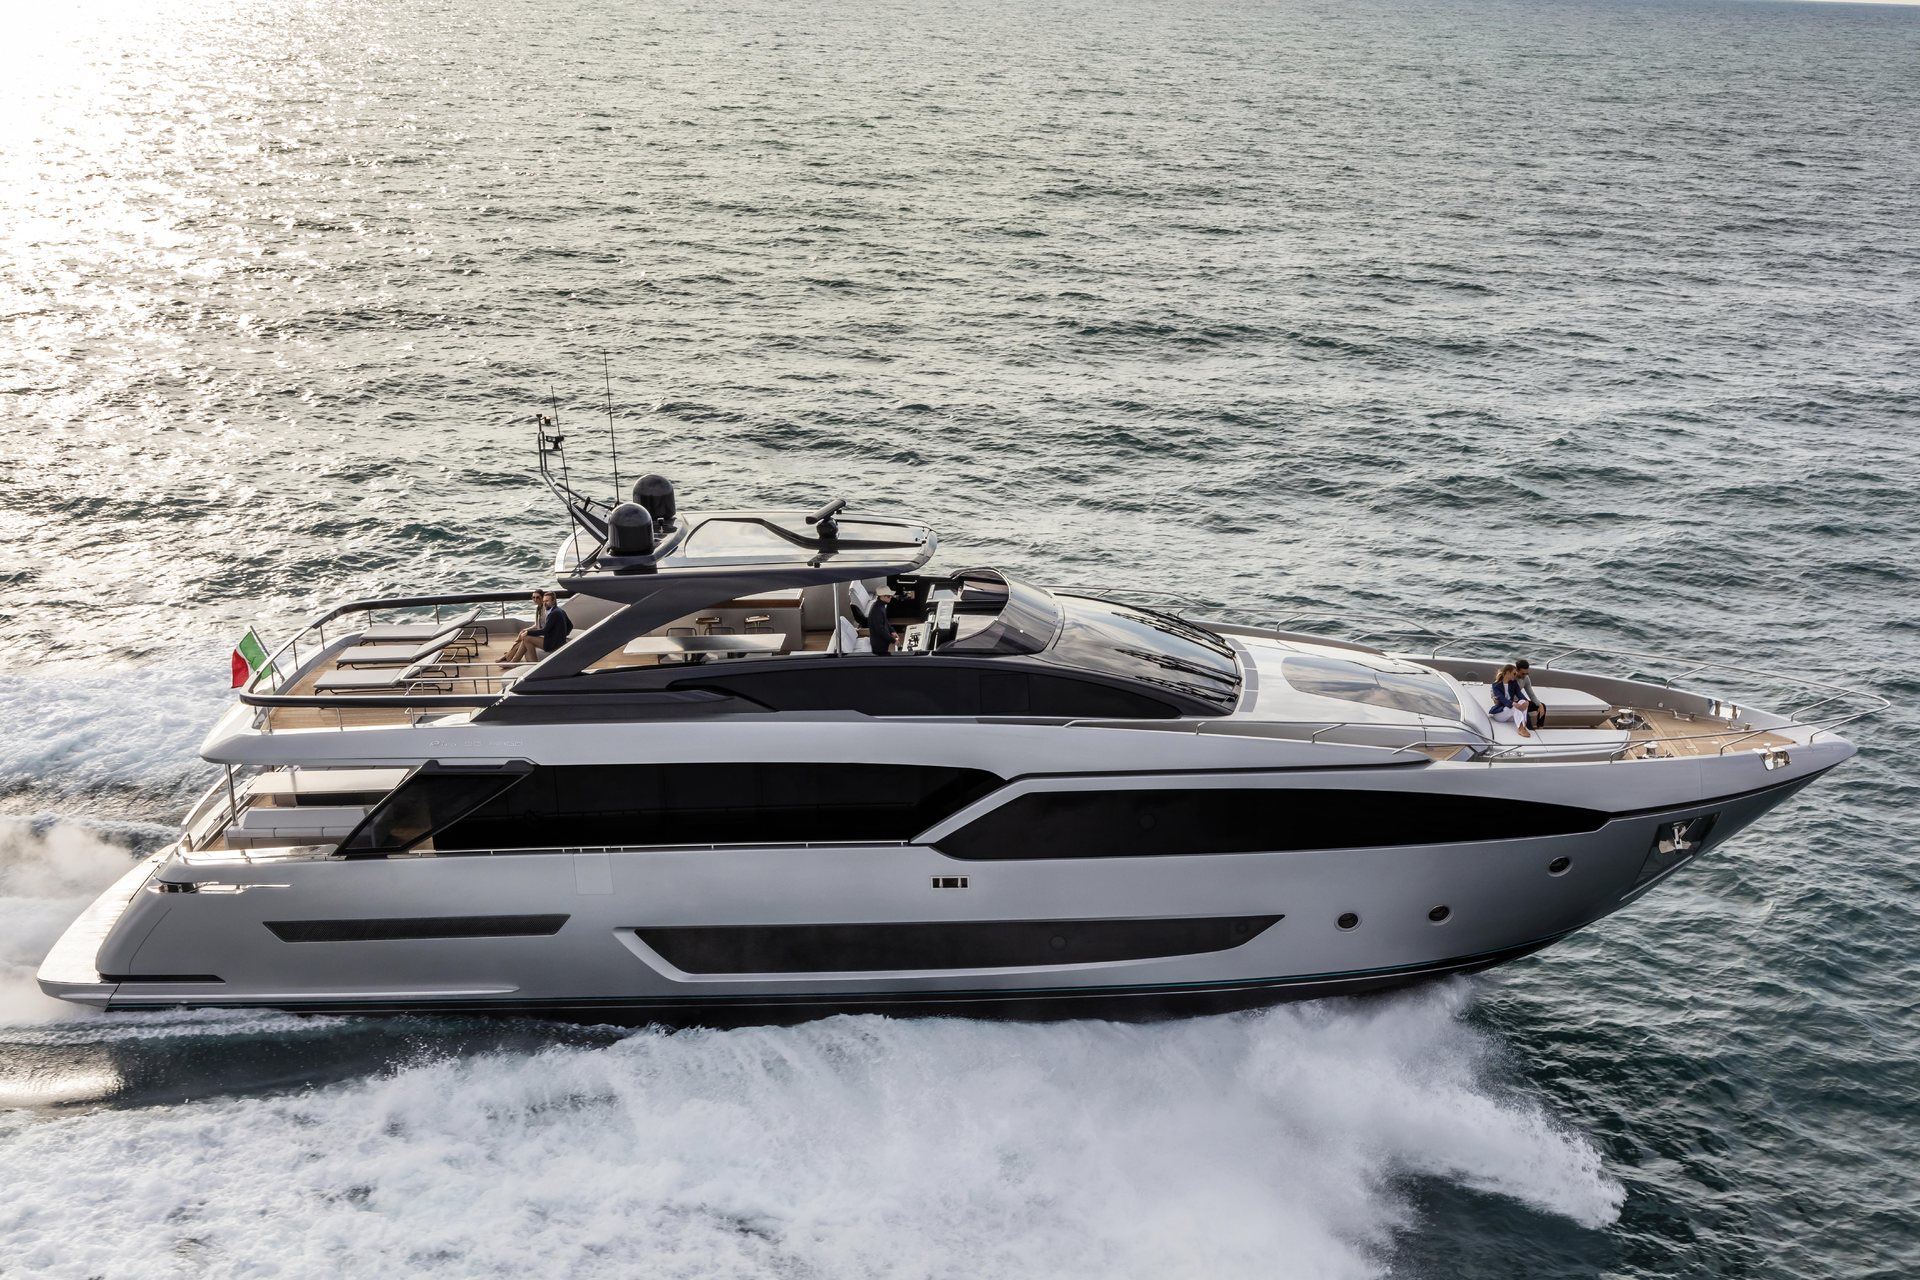 360 VR Virtual Tours of the Riva 90' Argo